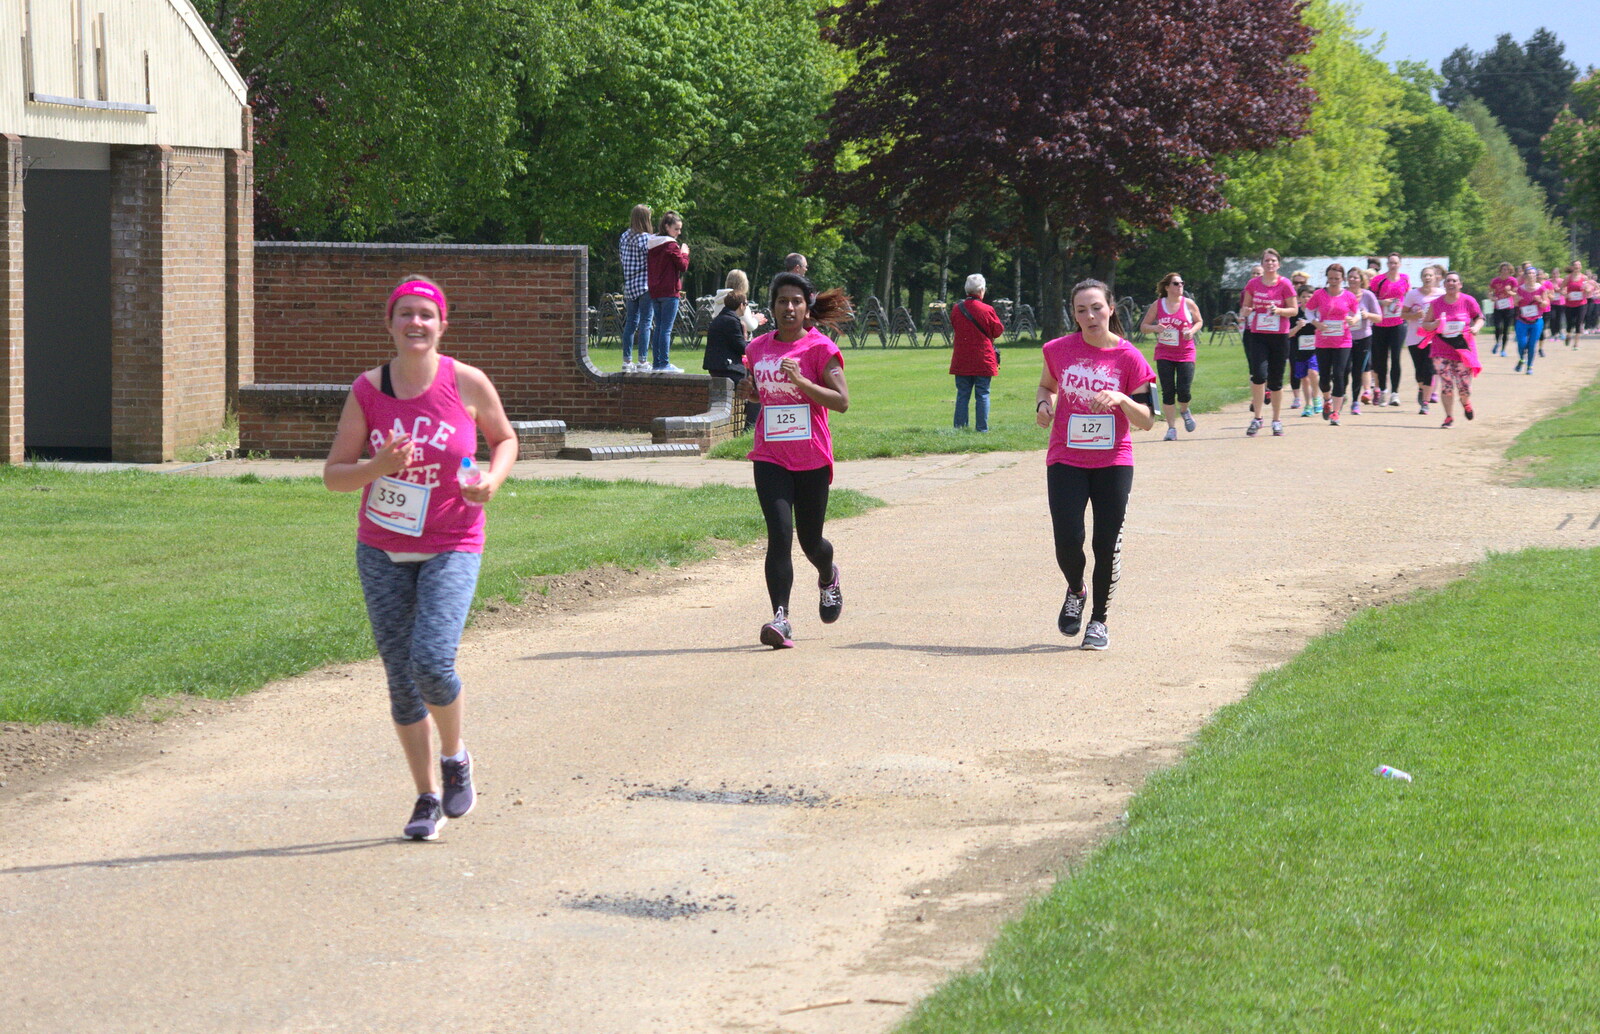 A throng of runners comes up to the 7k mark from Isobel's Race for Life, Costessey, Norwich - 15th May 2016